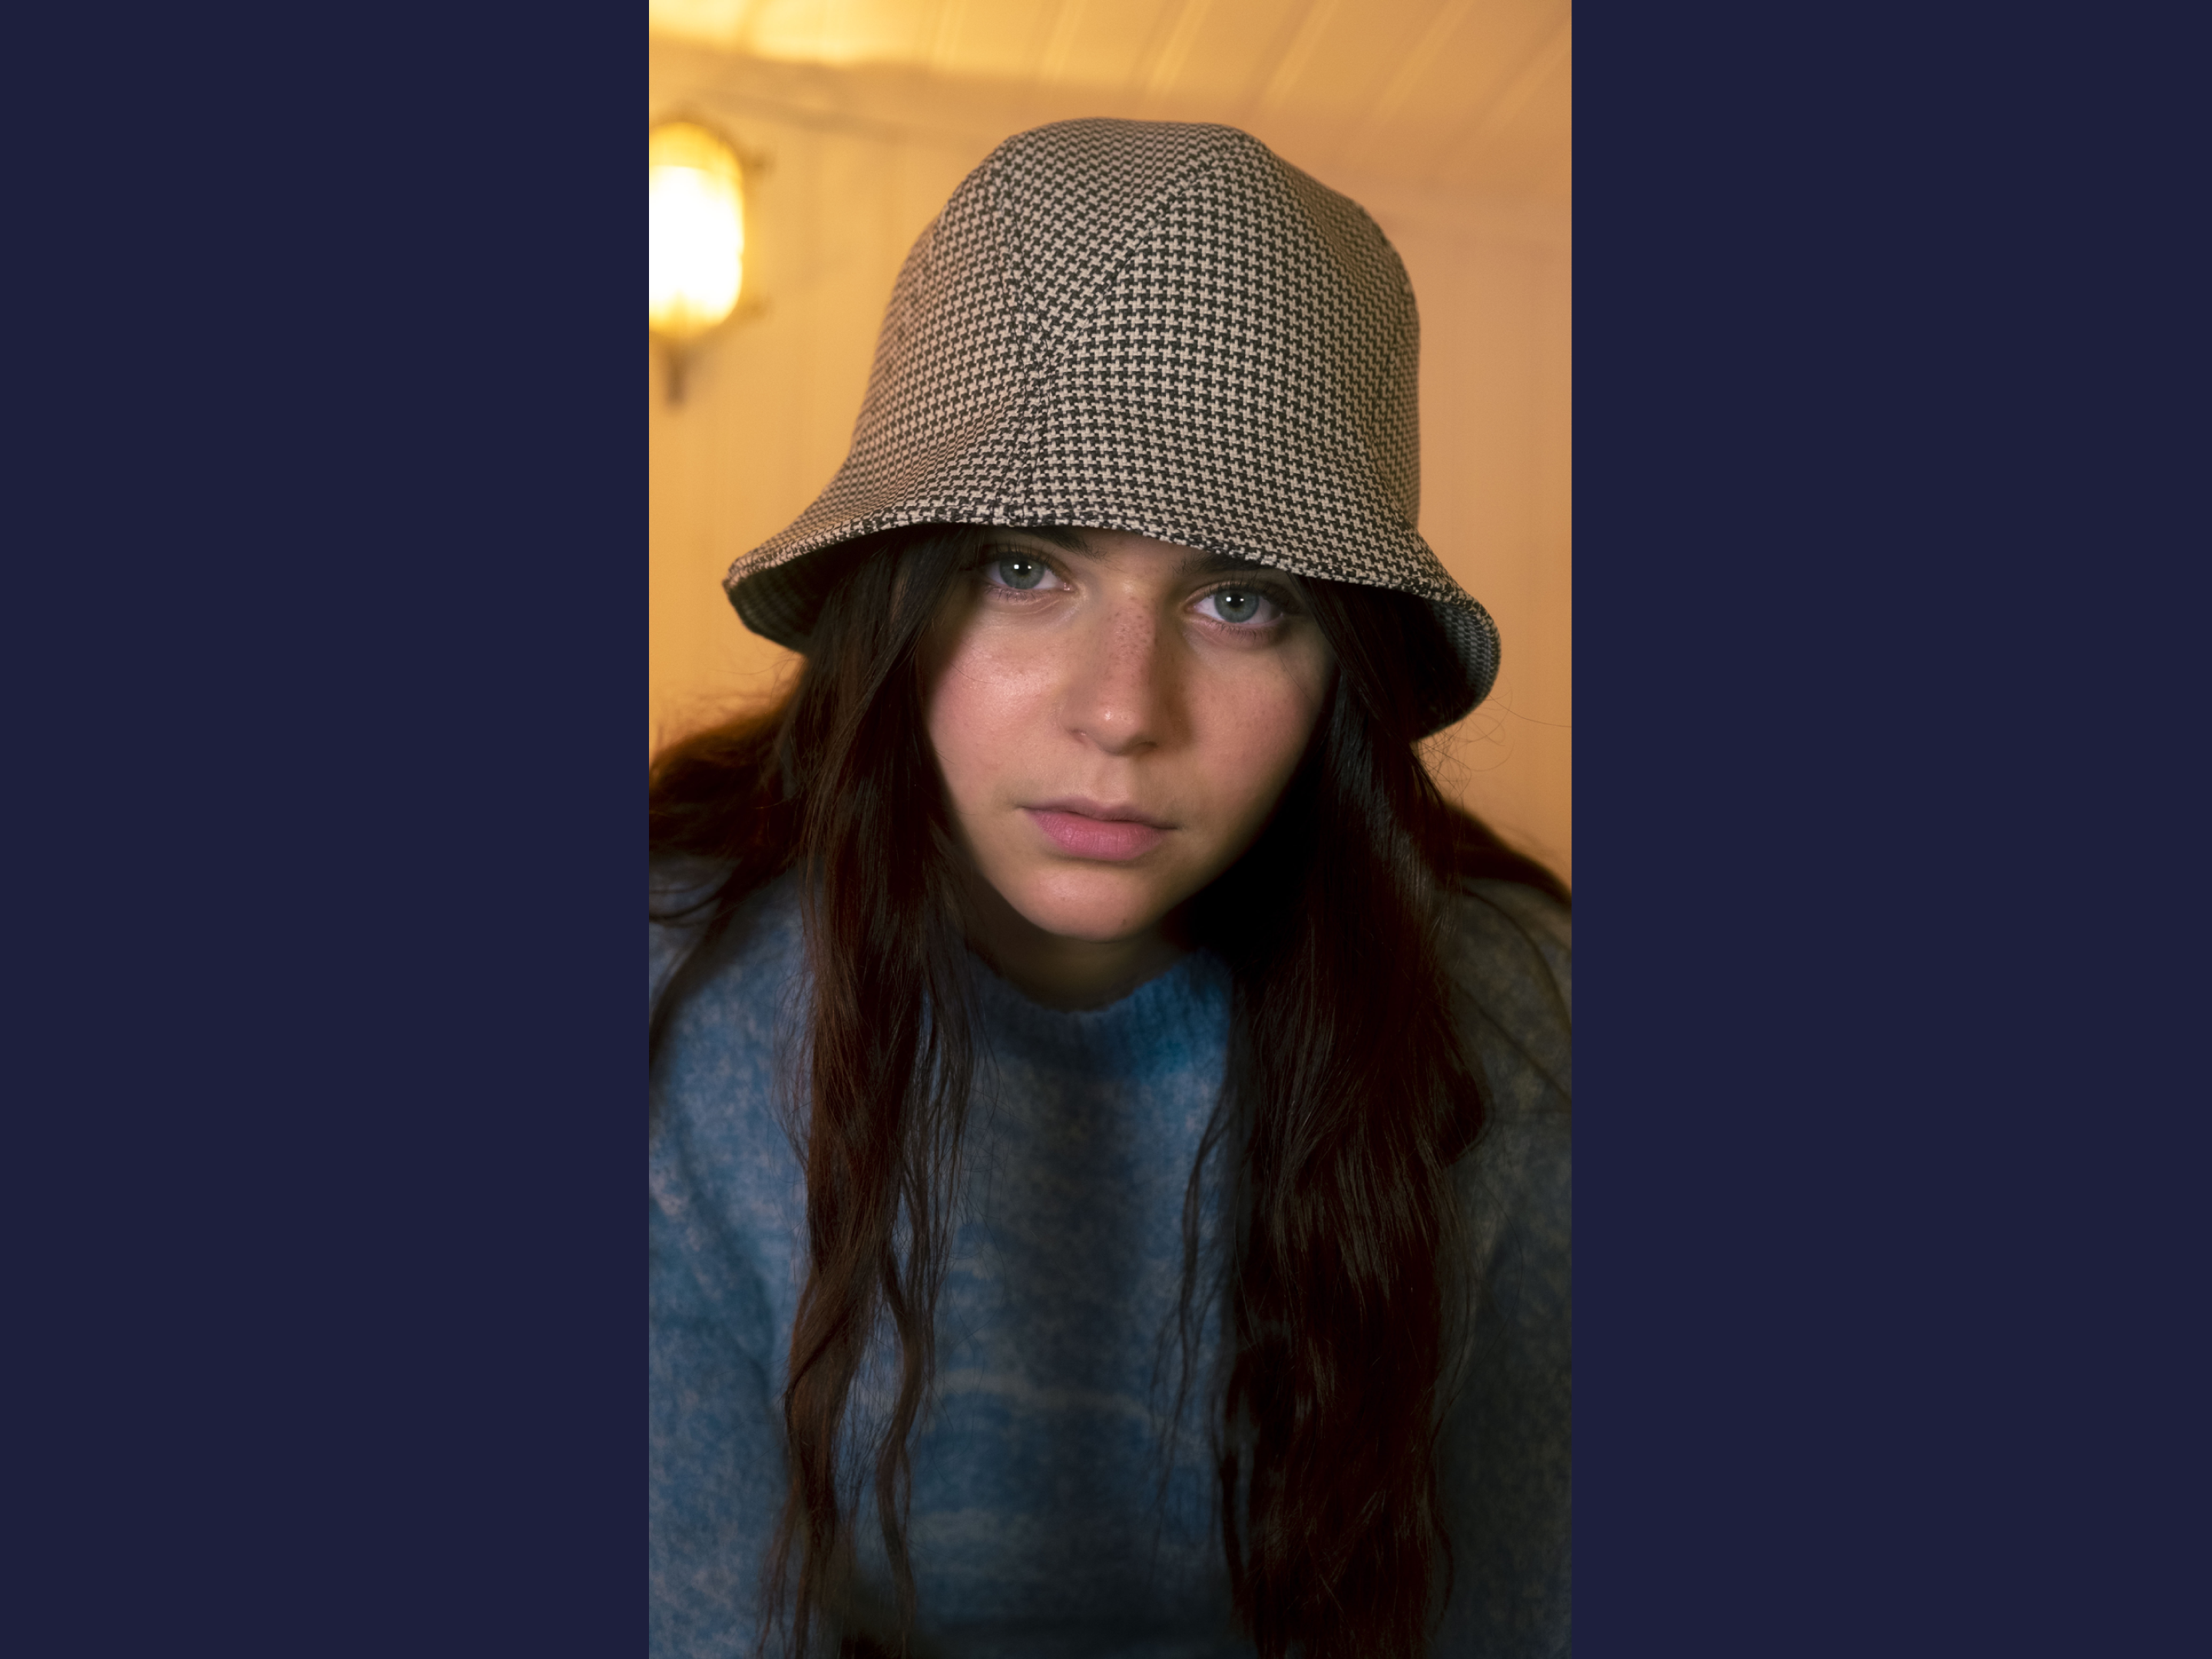 Michetti is wearing a Le Panache Paris© bucket hat made in France with Go Couture_61138, Gabriel© brand fabric, 100% Trevira cs, brown houndstooth pattern on a beige background.